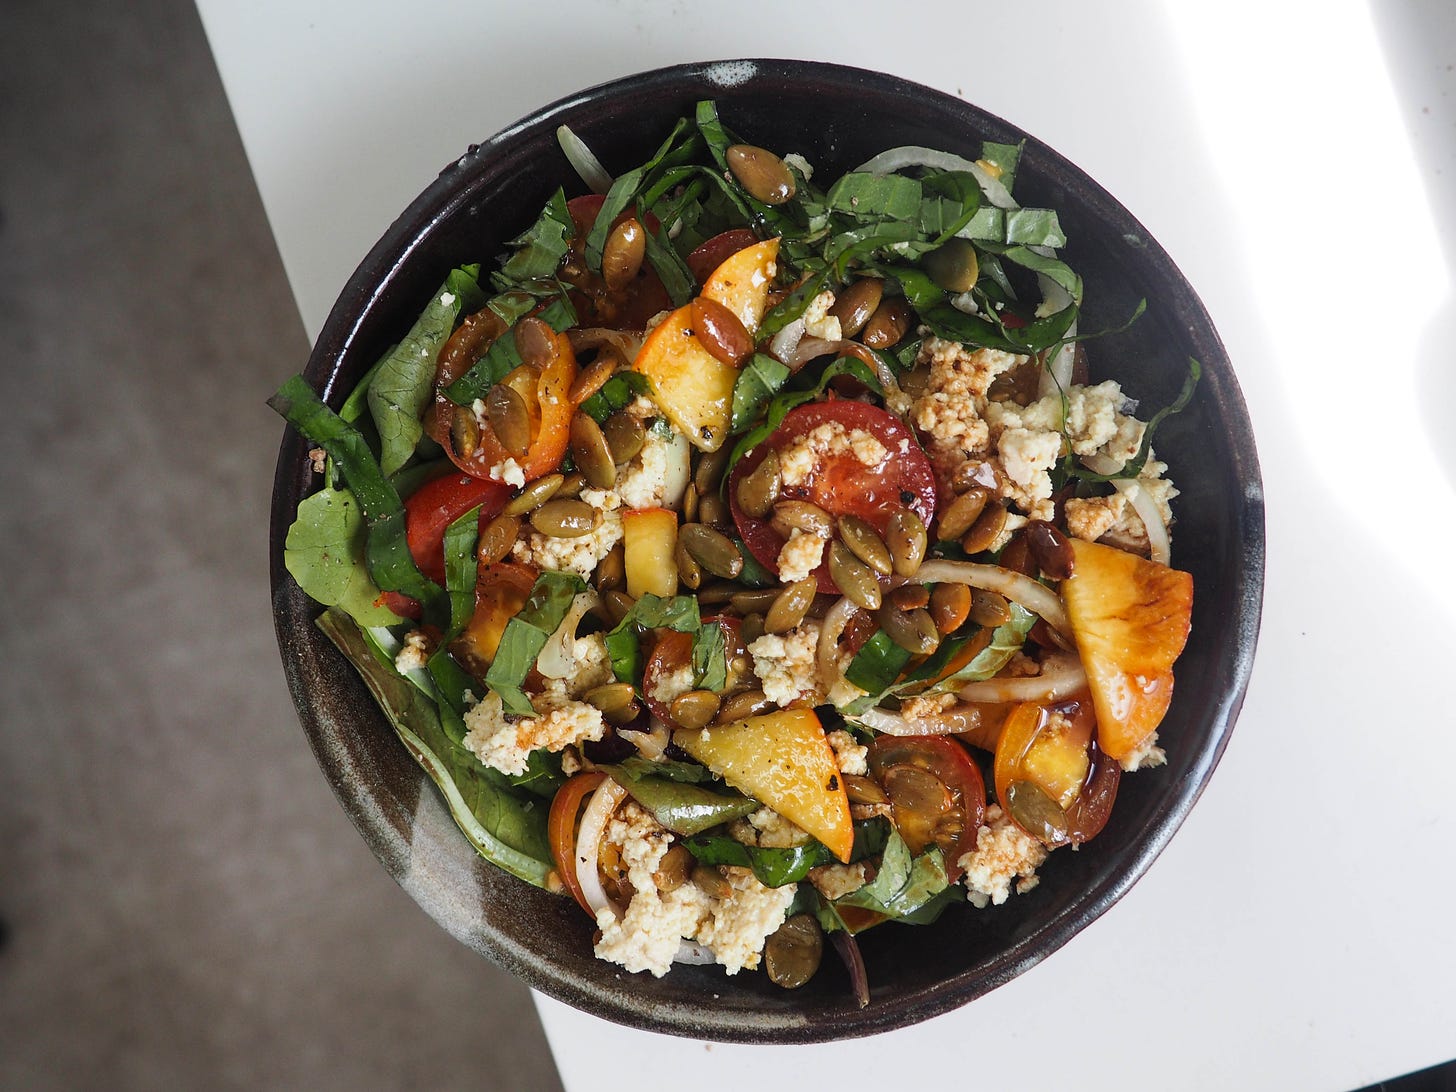 Tomato, peach and basil summer salad with onions, cheesy tofu and roasted pumpkin seeds.